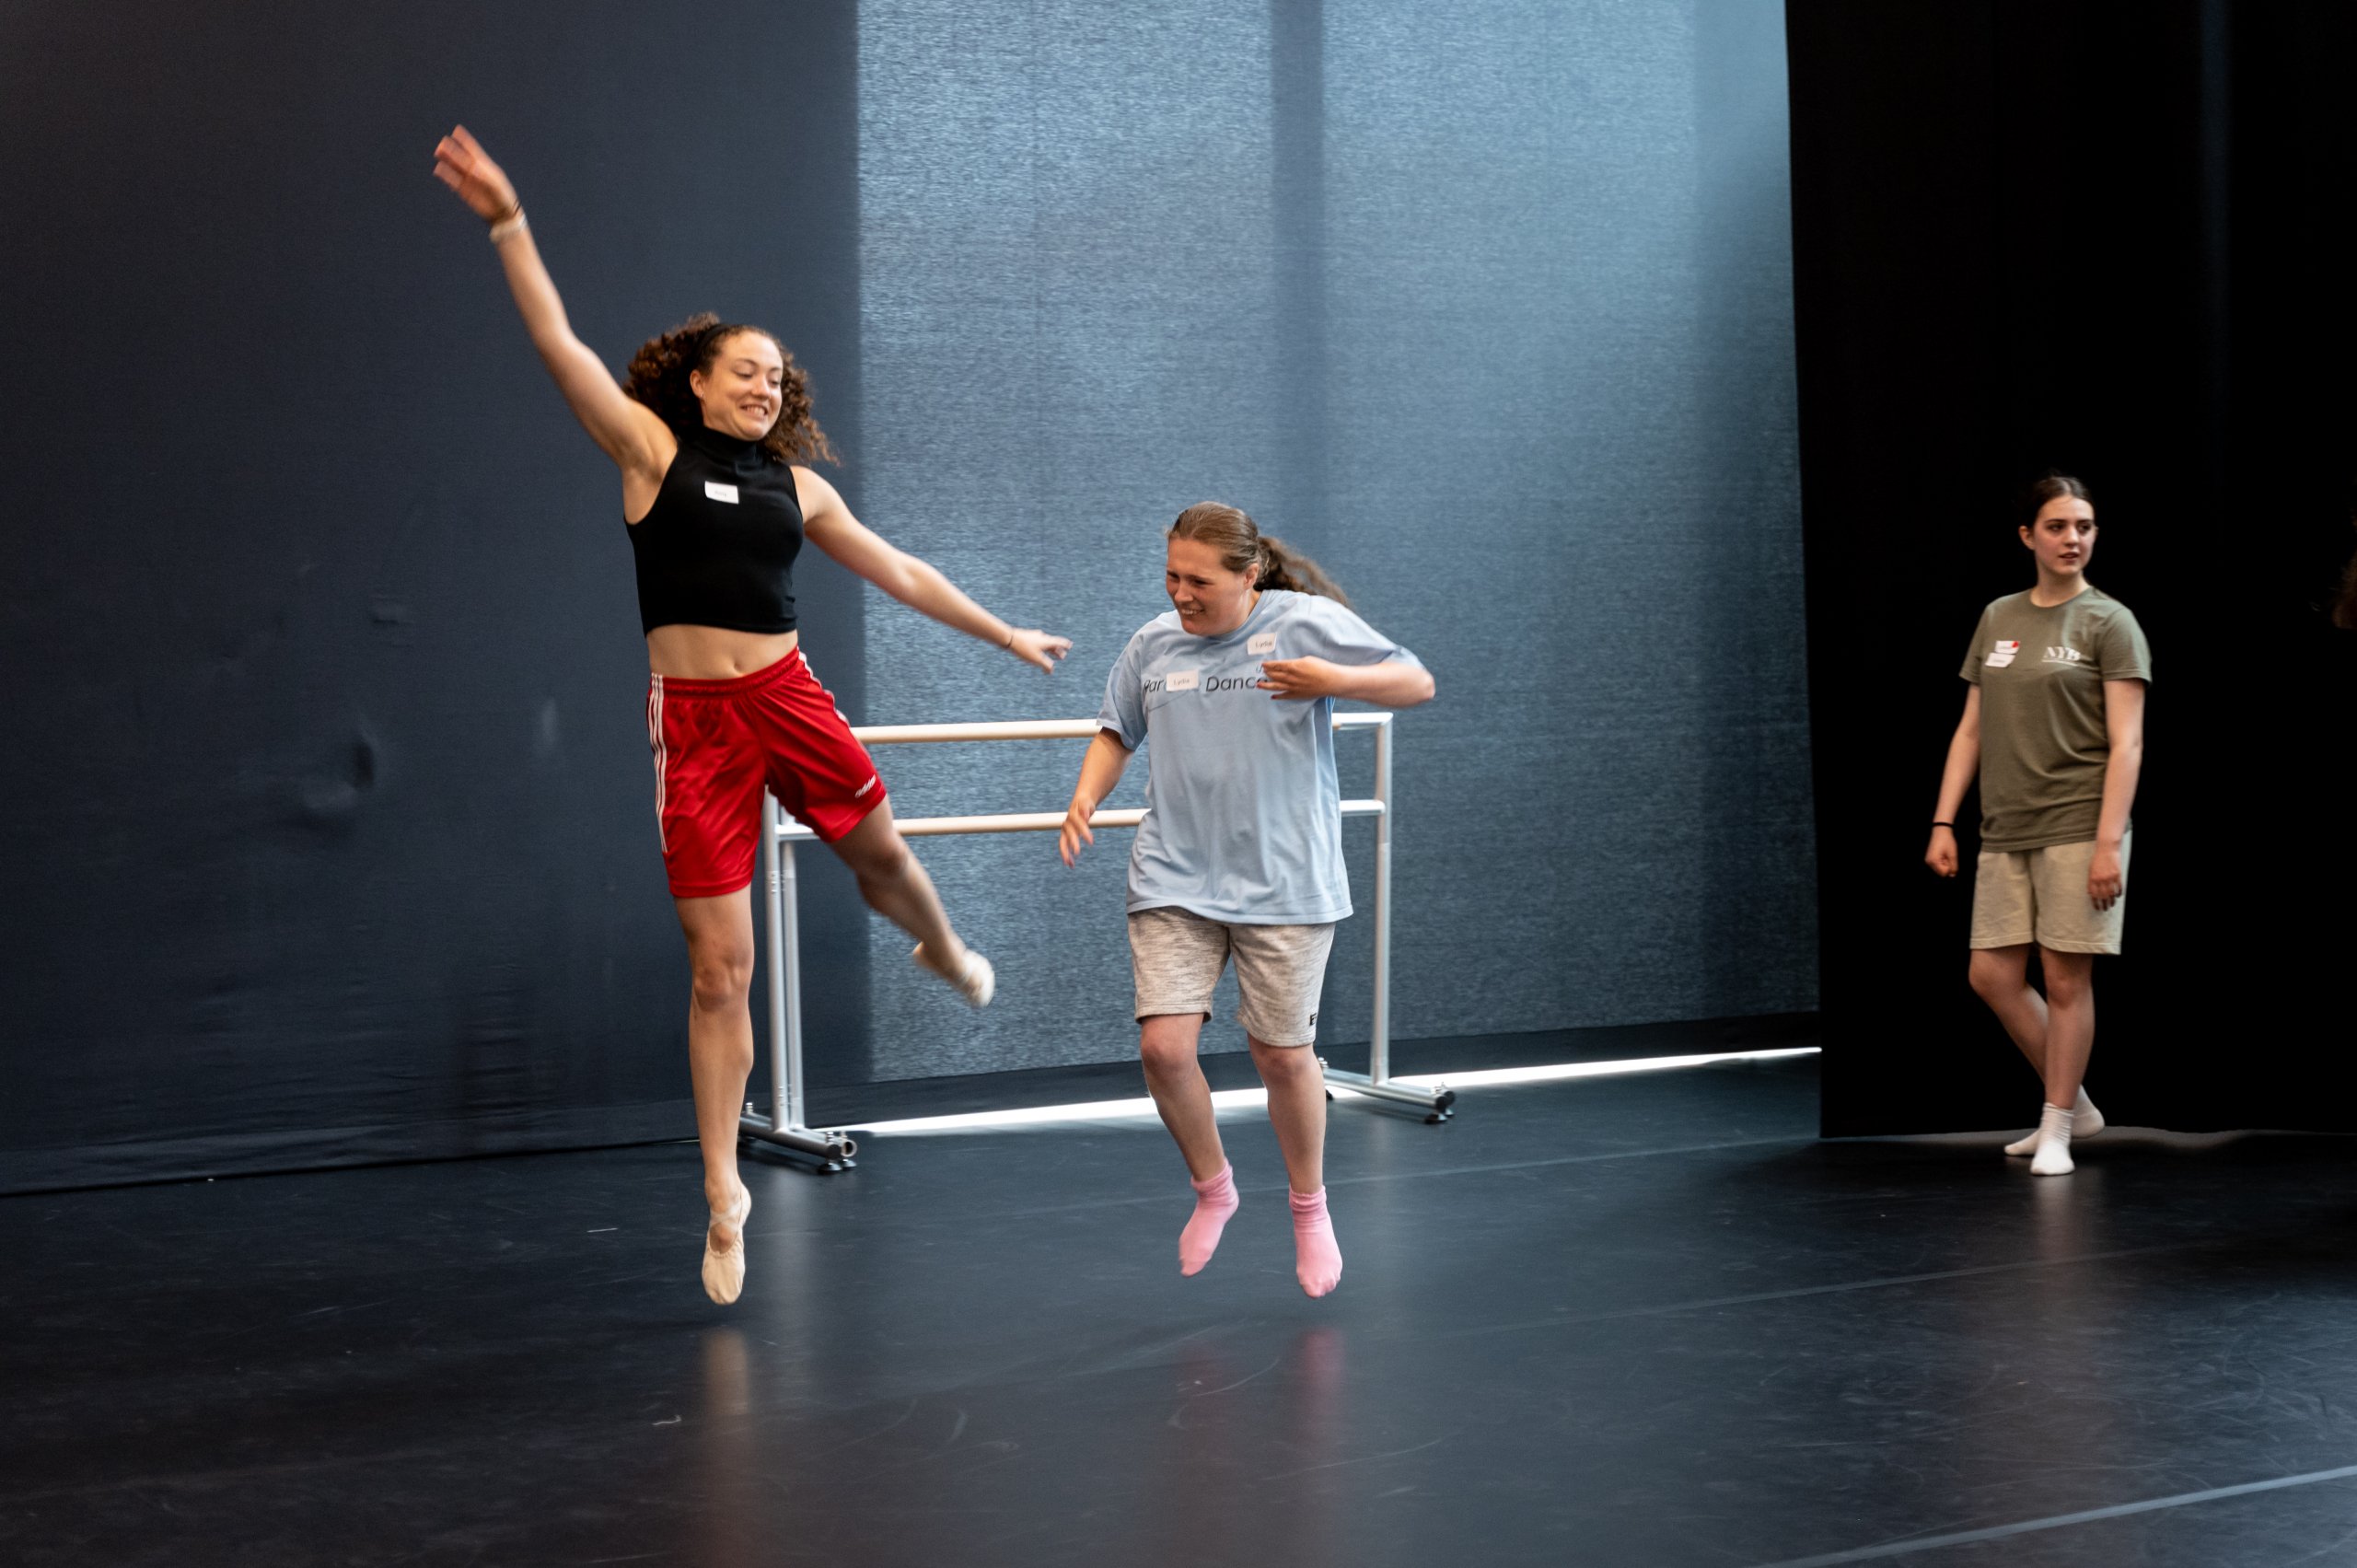 Two dancers are elevating side by side. One dancer has their leg extended behind them and another is jumping with their legs slightly apart. There is a dancer and a ballet barre in the background. 